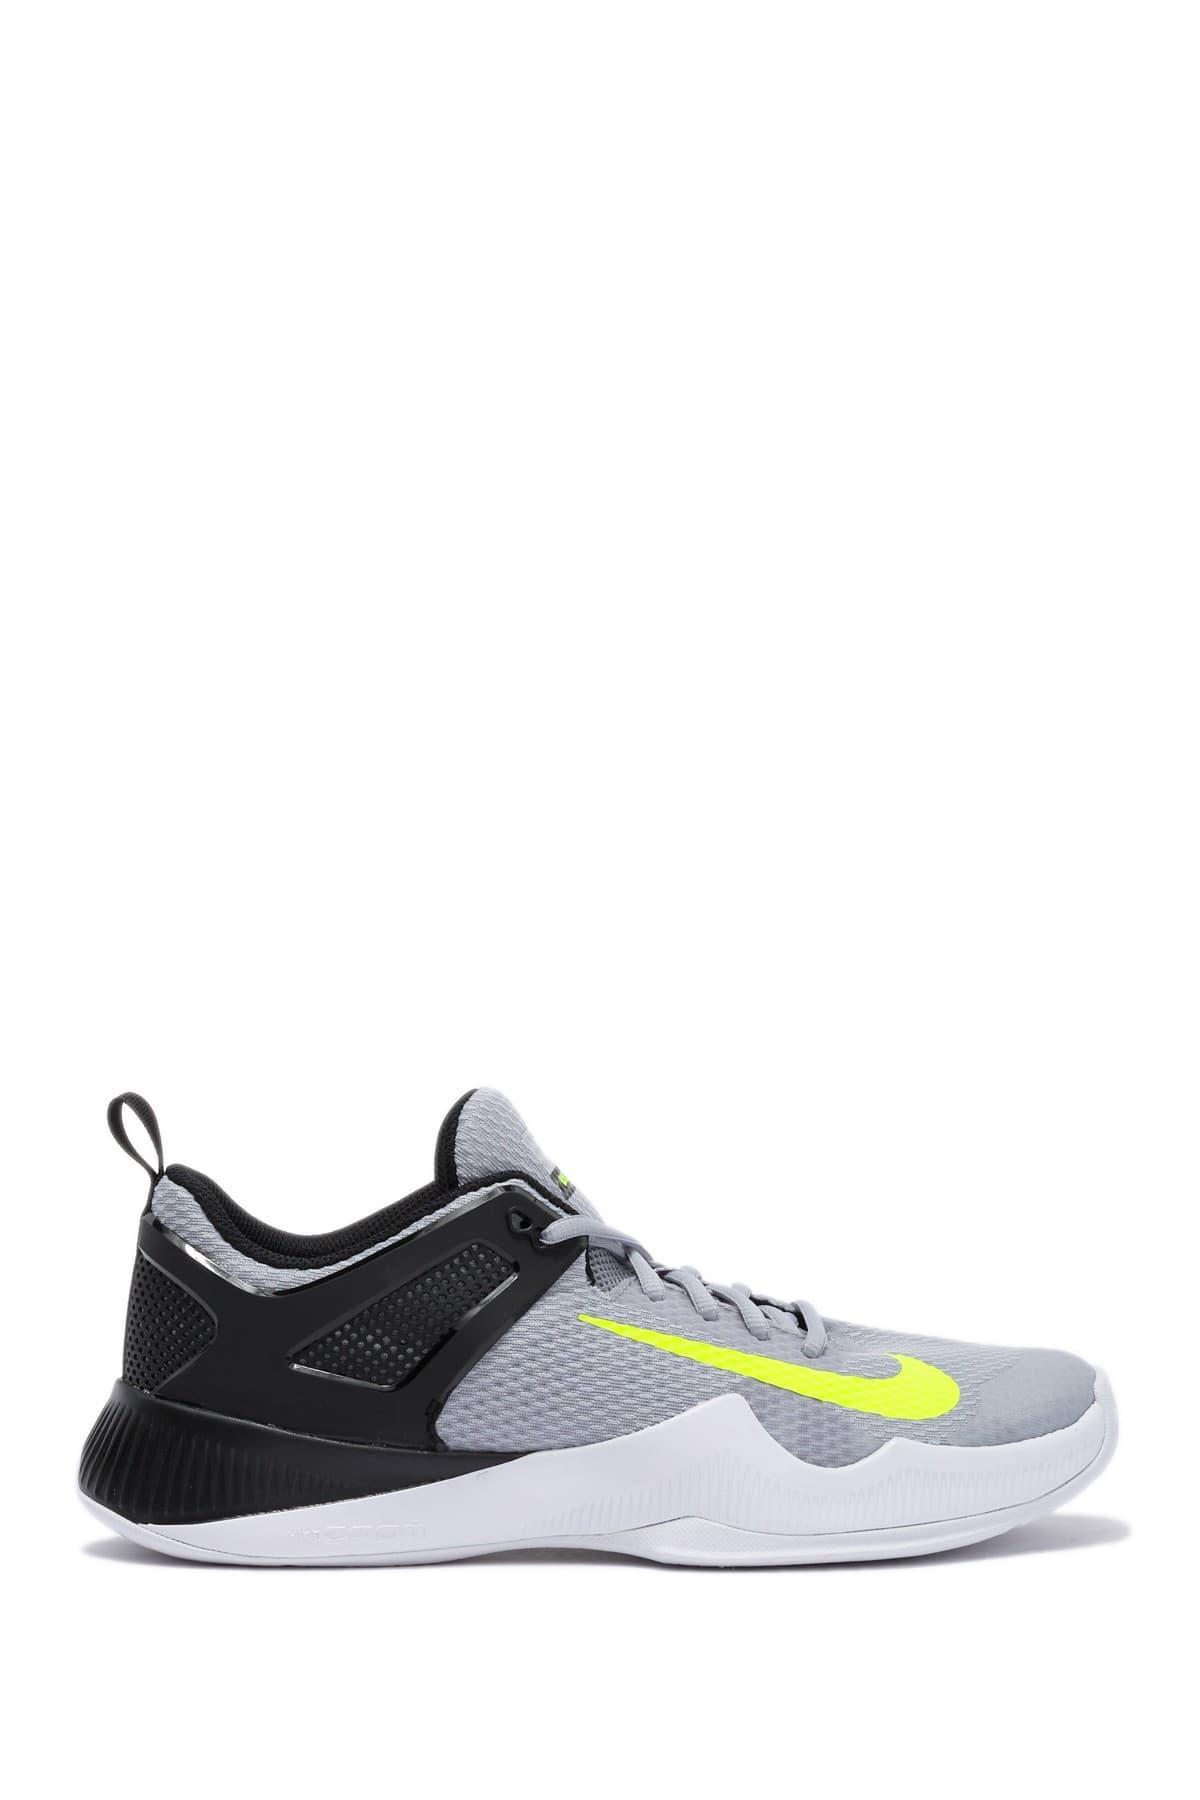 Nike Air Zoom Hyperattack Volleyball Shoe in Gray | Lyst